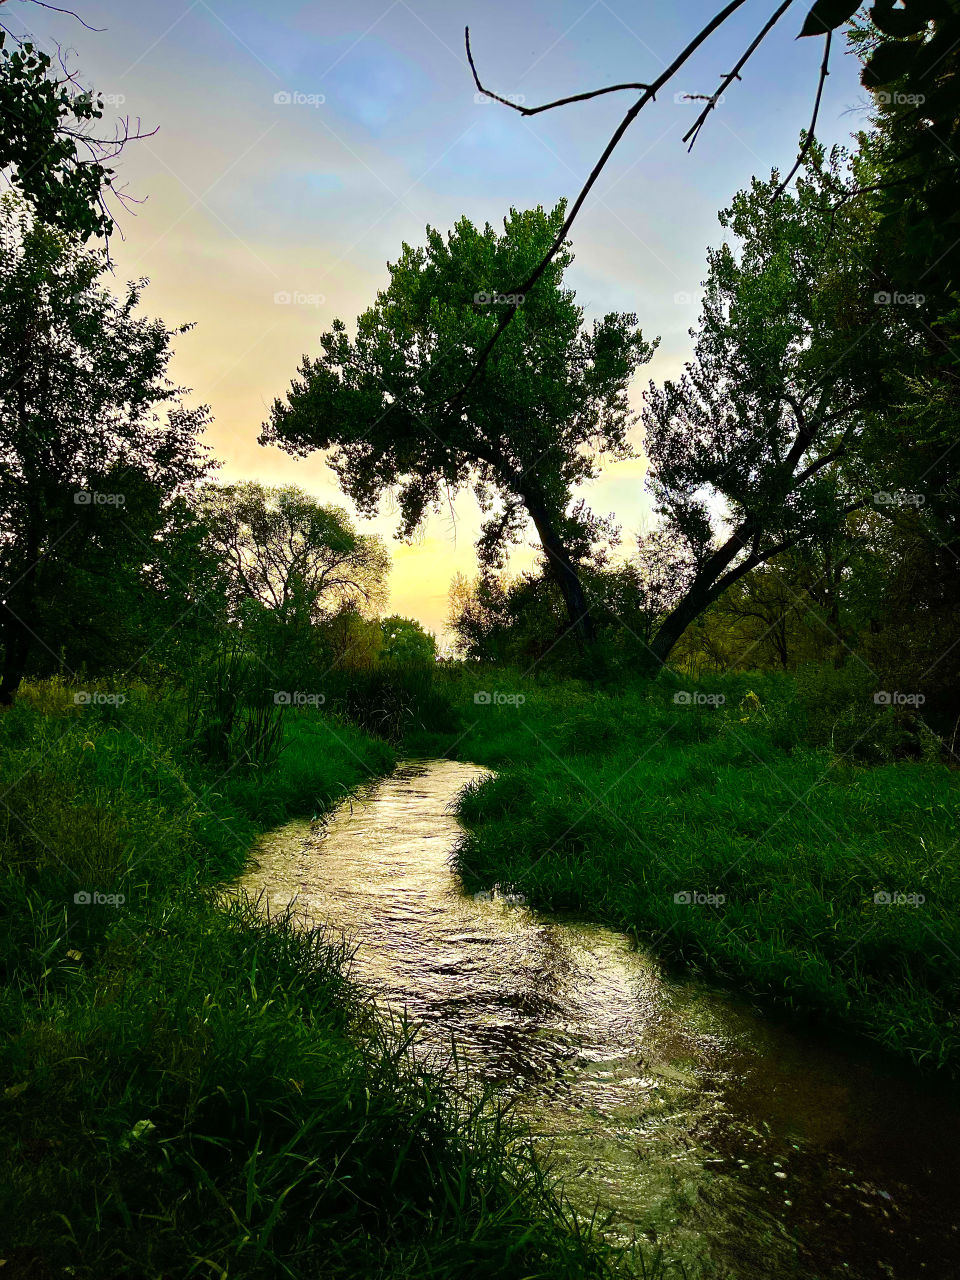 The remains of a Colorado sunset linger behind a stream reflecting the twilight.